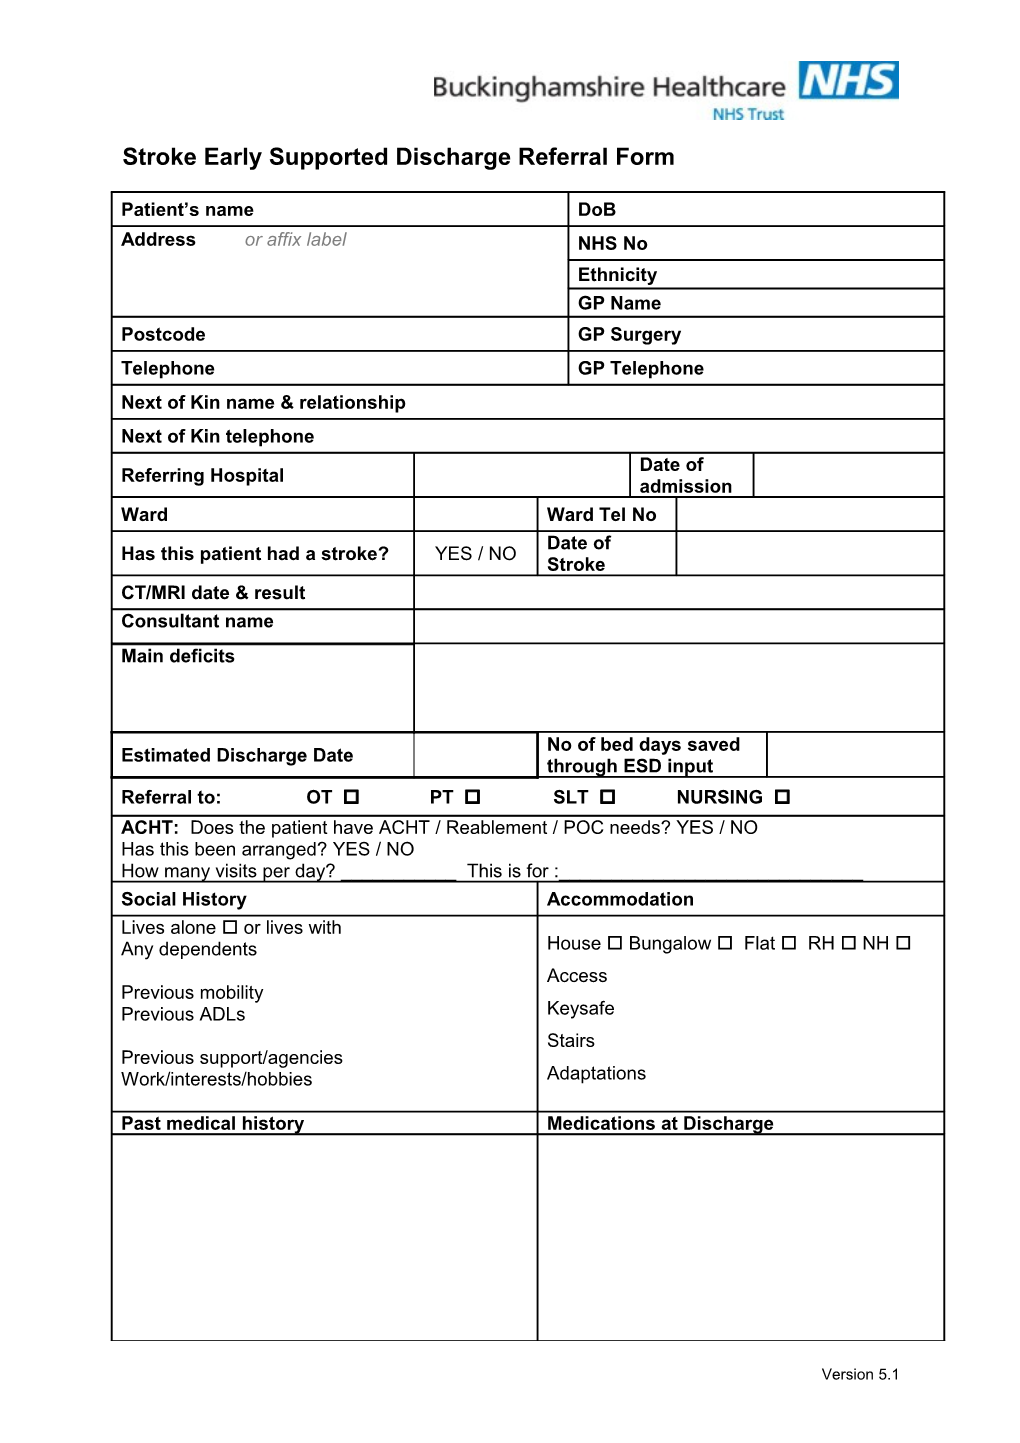 Stroke Early Supported Discharge Referral Form